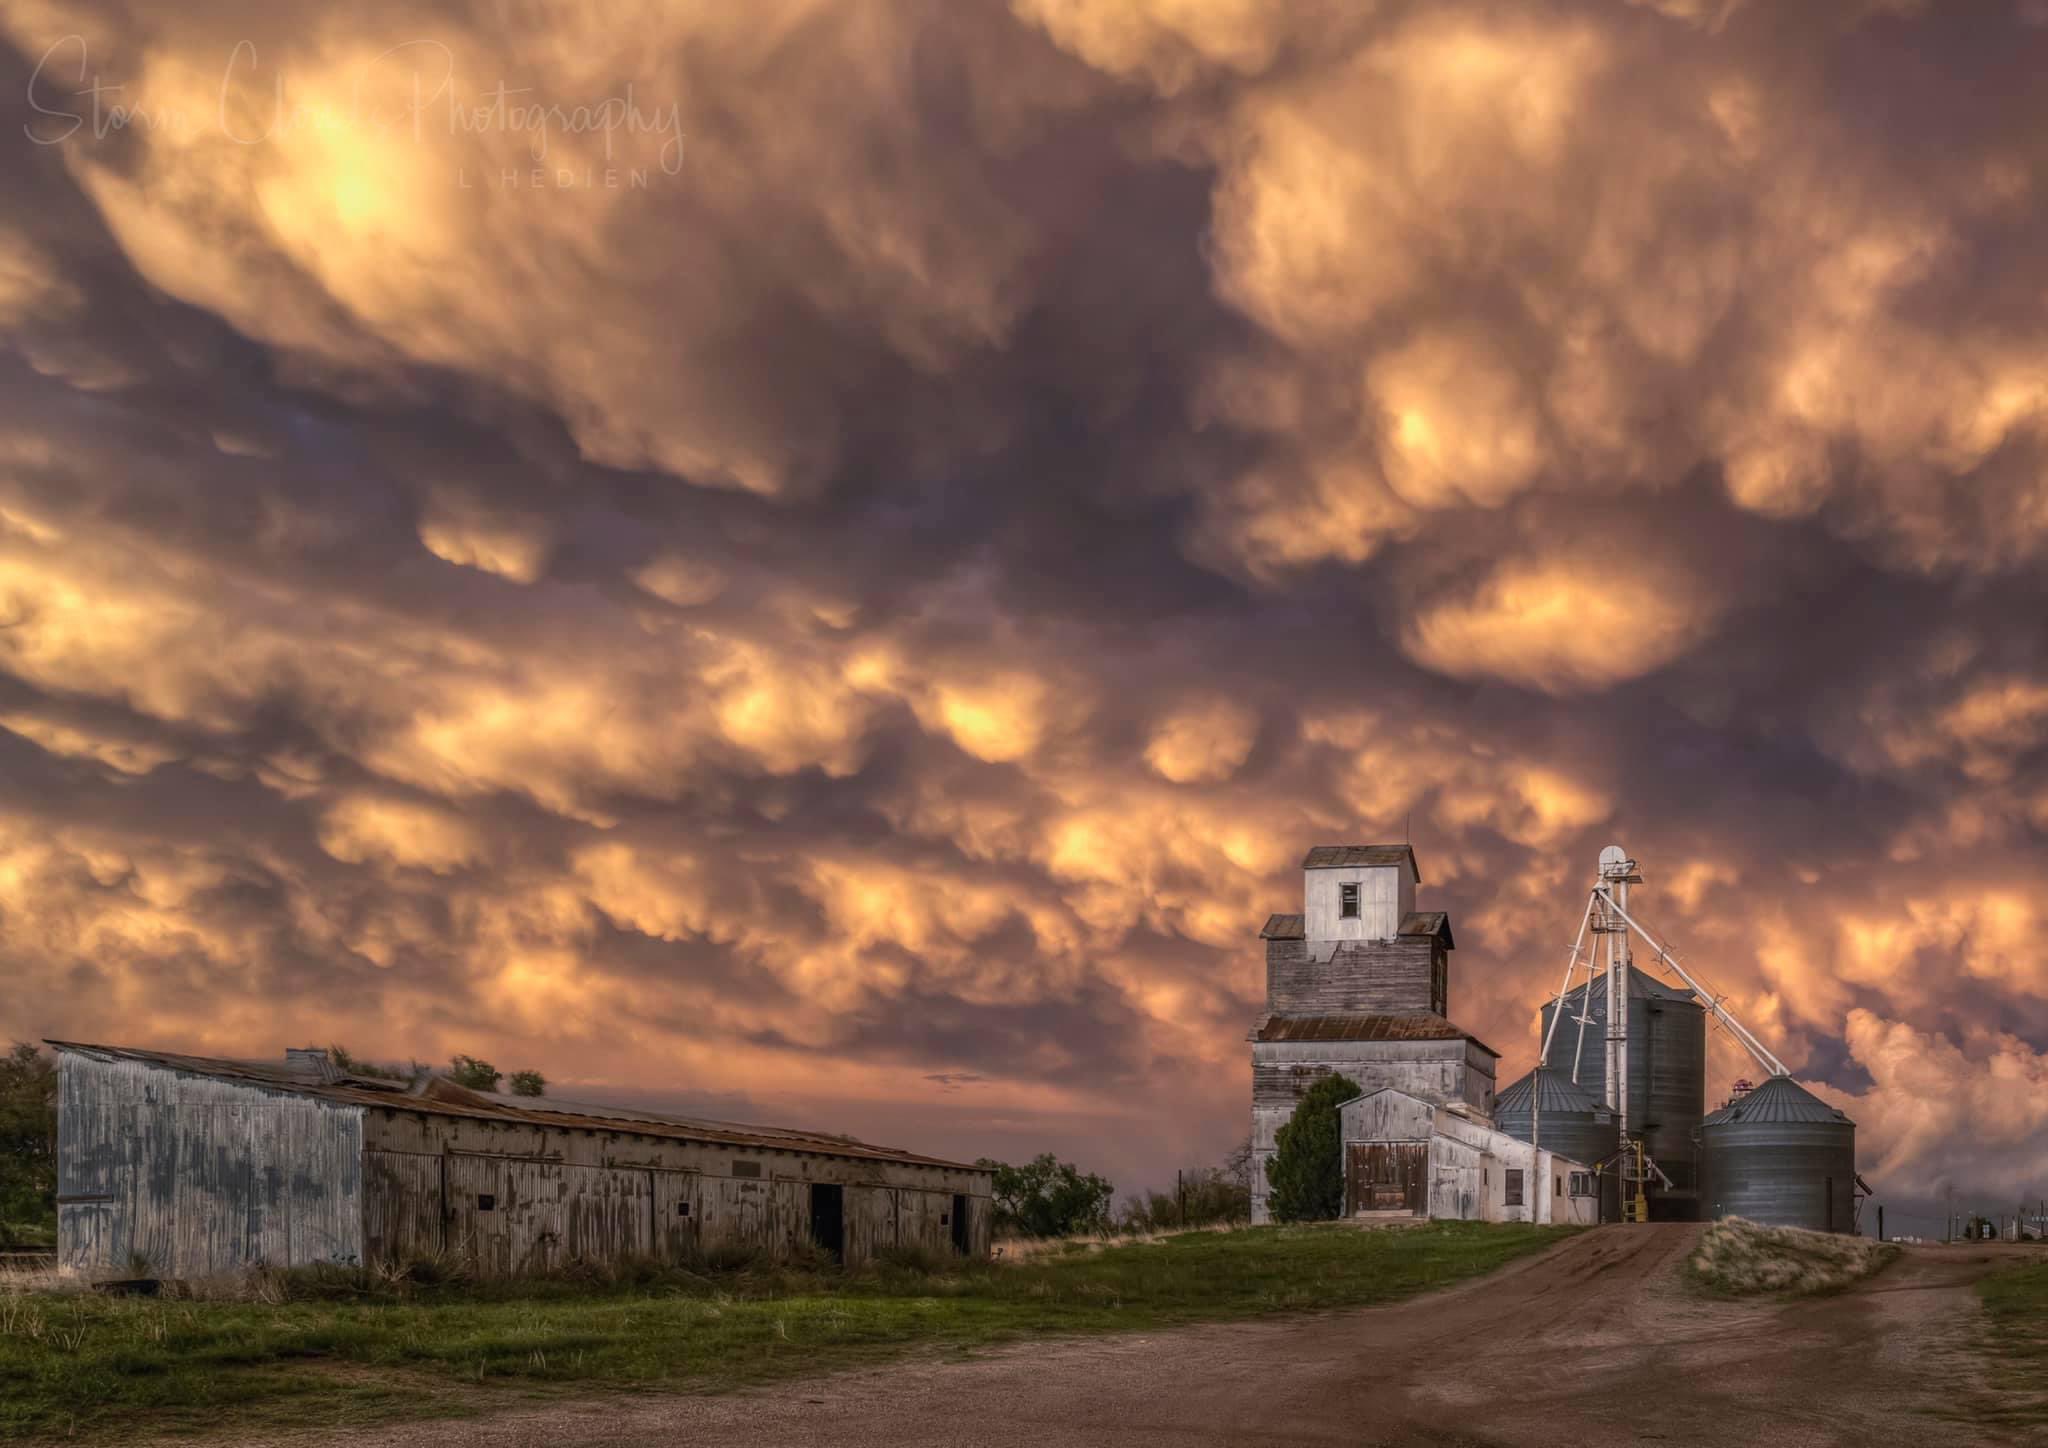 2nd Place Mammatus over a grain elevator in Colorado by Laura Hedien @lhedien